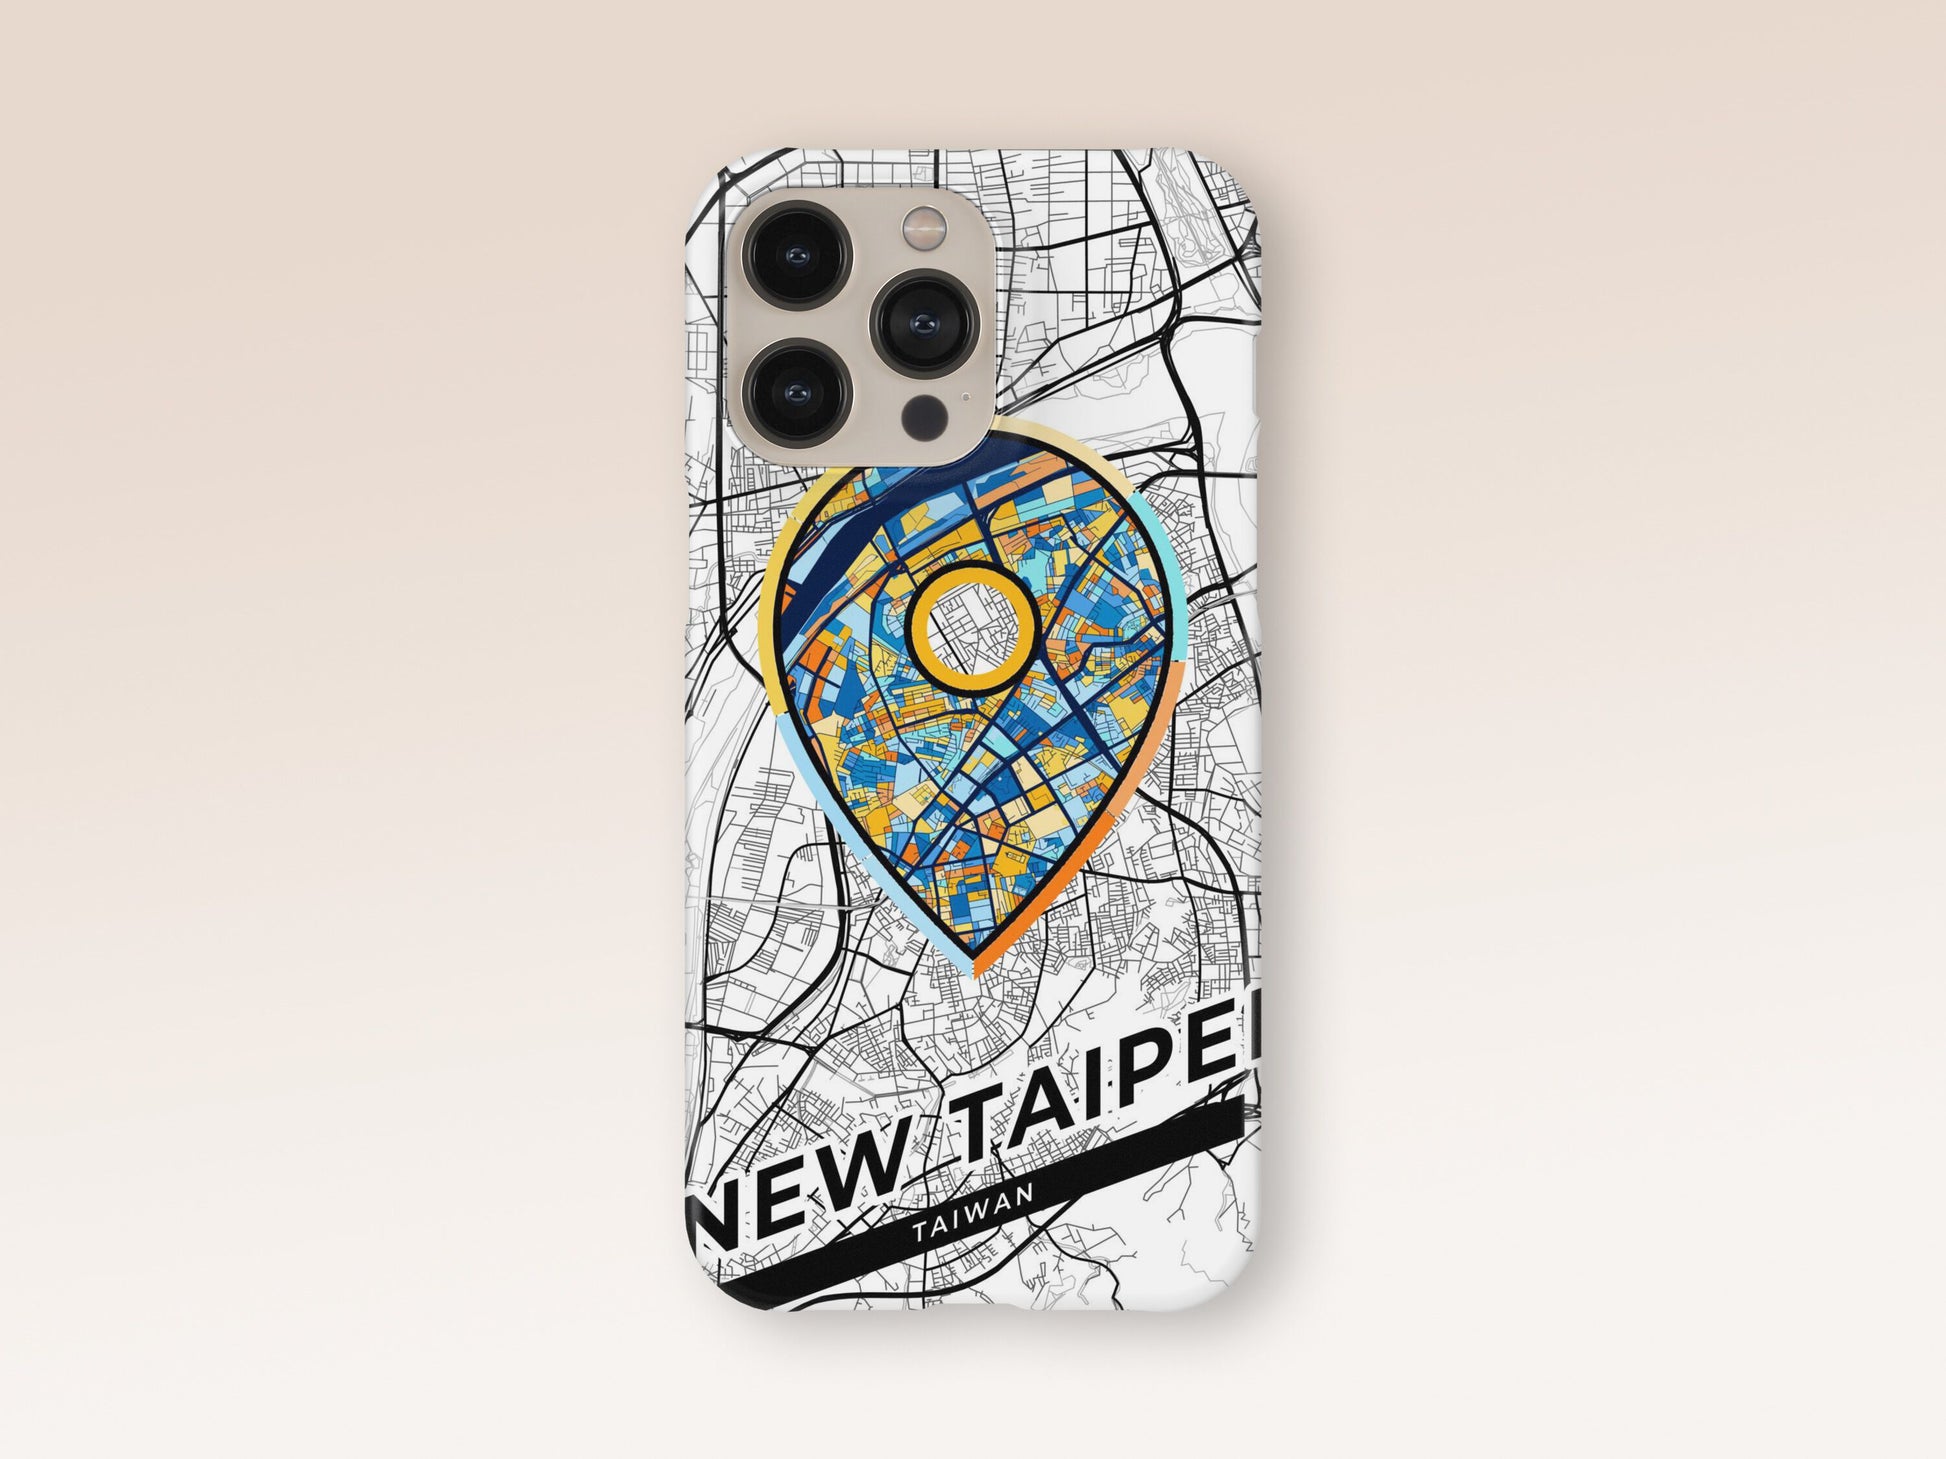 New Taipei Taiwan slim phone case with colorful icon 1